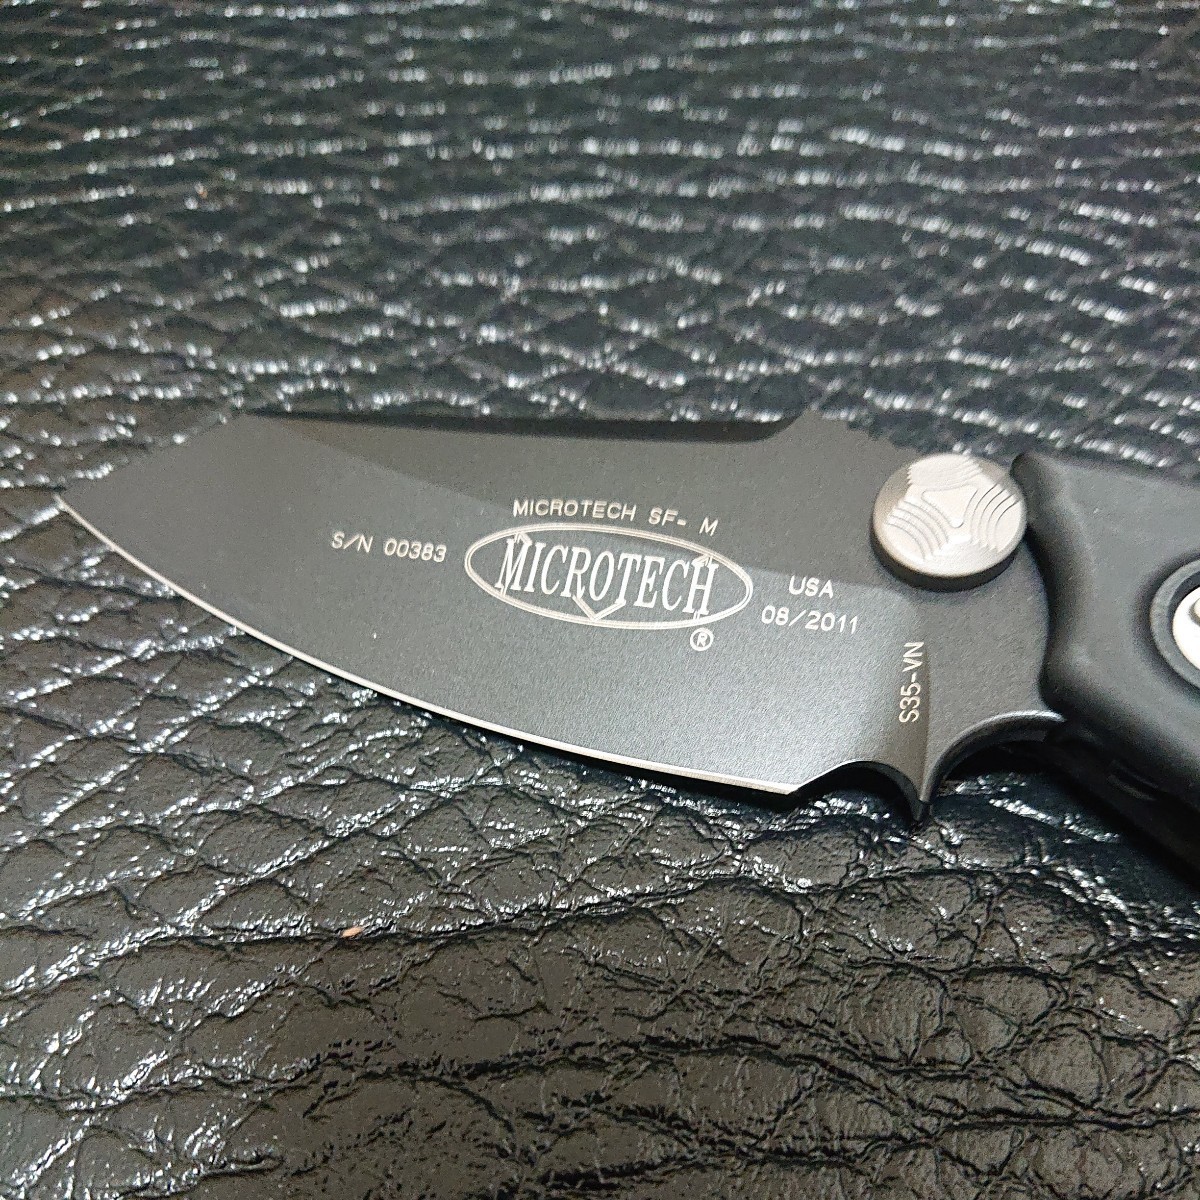 Microtech knives SF M/A Black Standard 129-1 【マイクロテック ナイフ】 未使用品 折りたたみナイフ_画像2